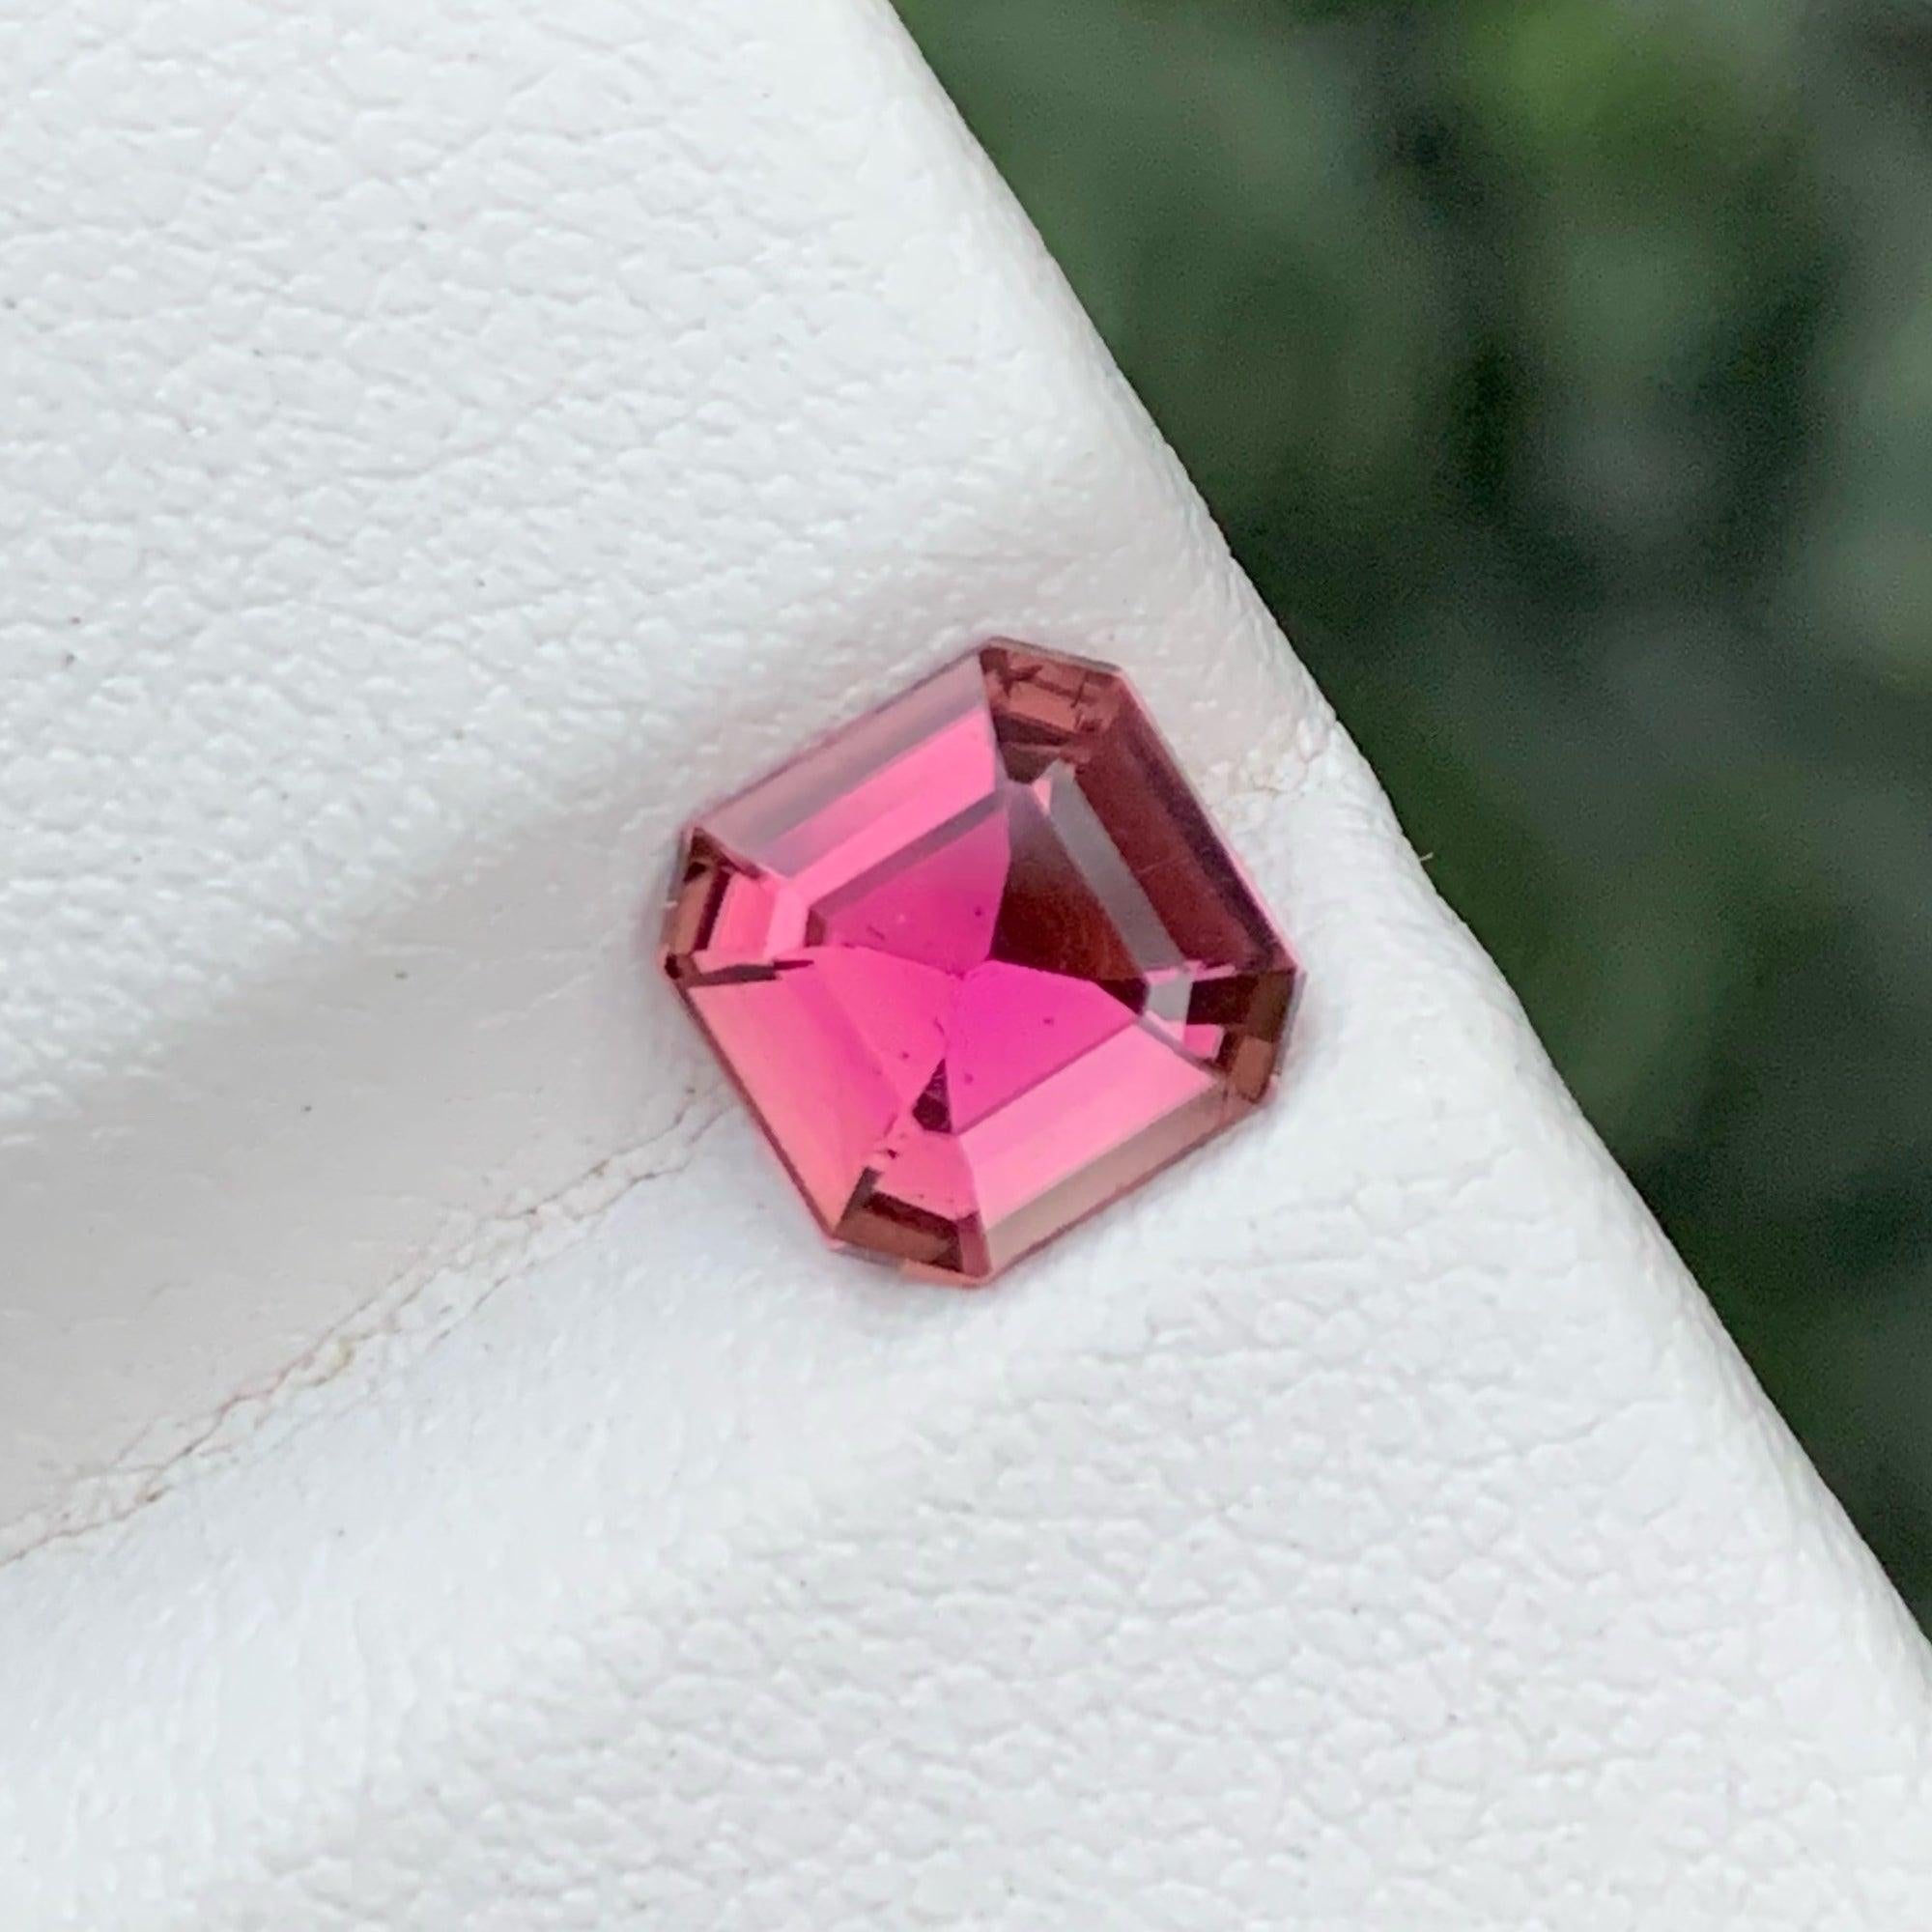 Exquisite Sweet Pink Natural Tourmaline of 1.30 carats from Afghanistan has a wonderful cut in a Octagon shape, incredible Pink Color. Great brilliance. This gem is Eye Clean Clarity.

Product Information
GEMSTONE TYPE:	Exquisite Sweet Pink Natural